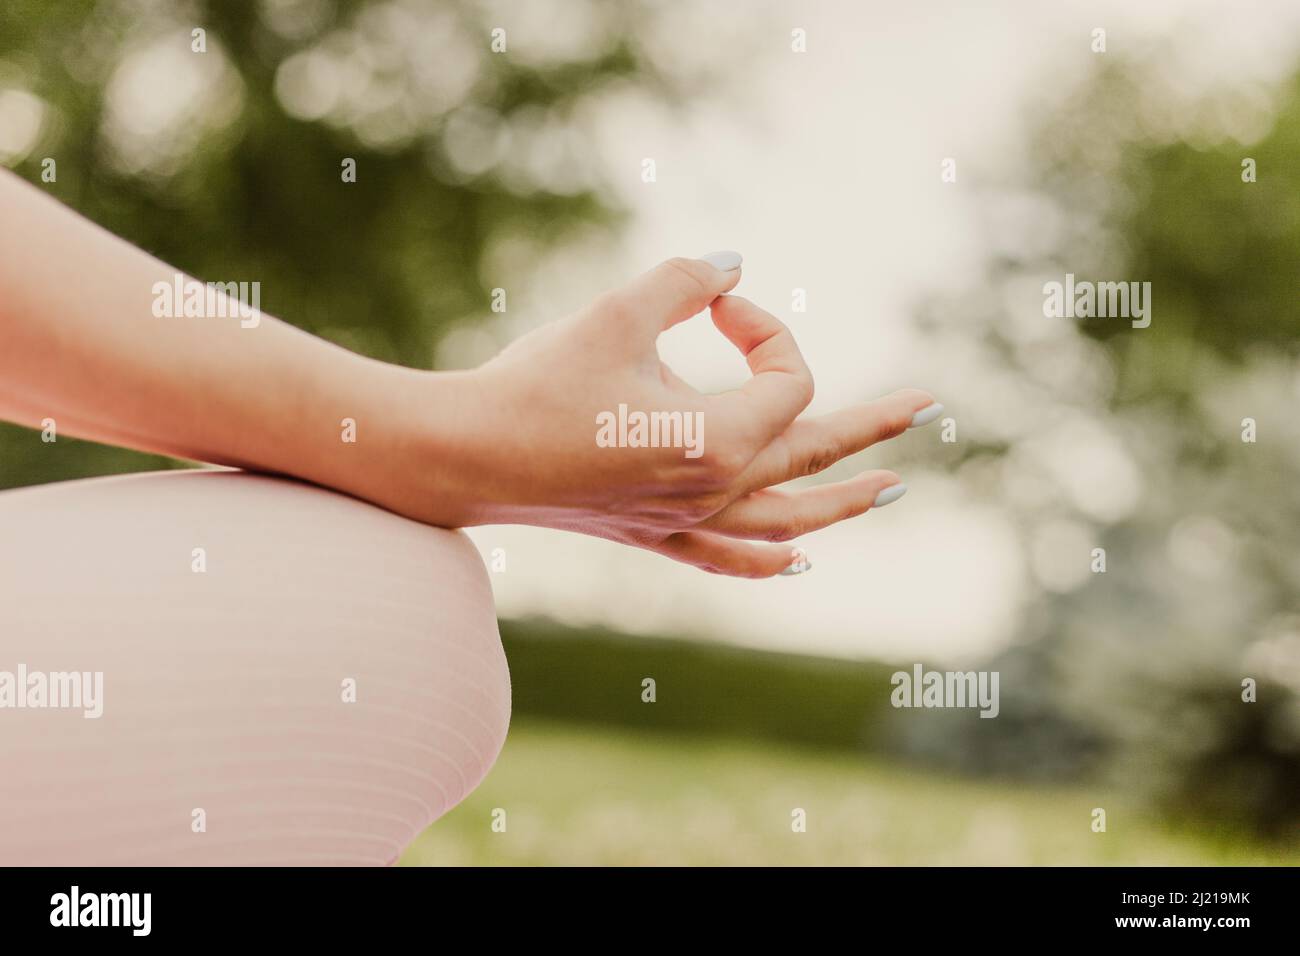 close-up of woman index finger and thumb in symbol of meditation and contemplation in park in summer Stock Photo